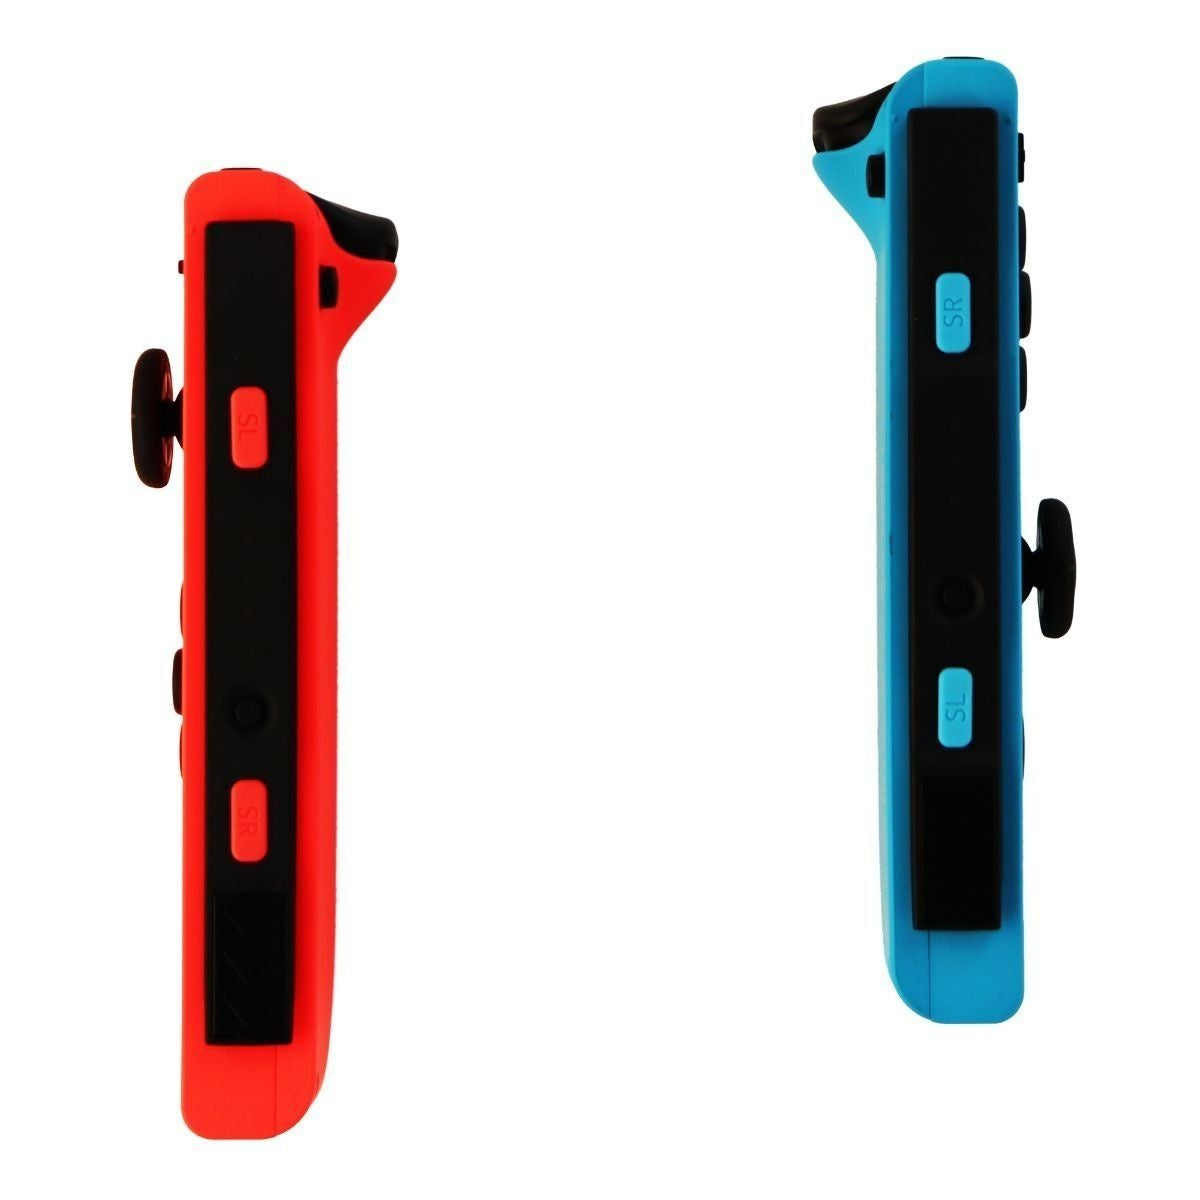 Nintendo Switch Joy-Cons (L/R) - Left Neon Red / Right Neon Blue Controllers